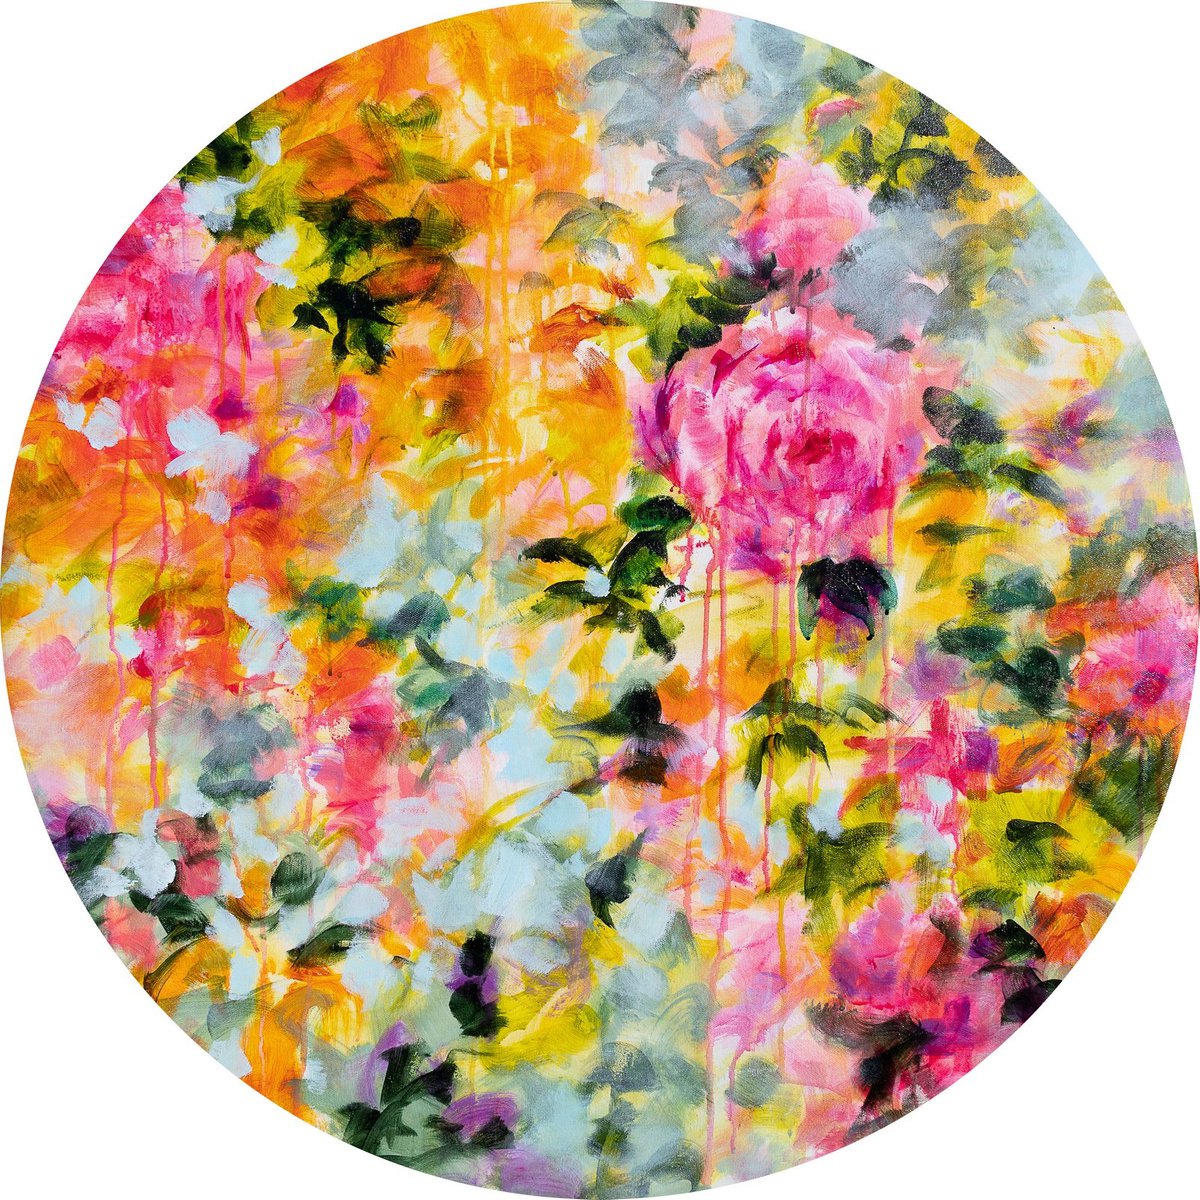 Psychedelic blue, pink, orange and yellow flowers tondo - Circular canvas by Fabienne Monestier